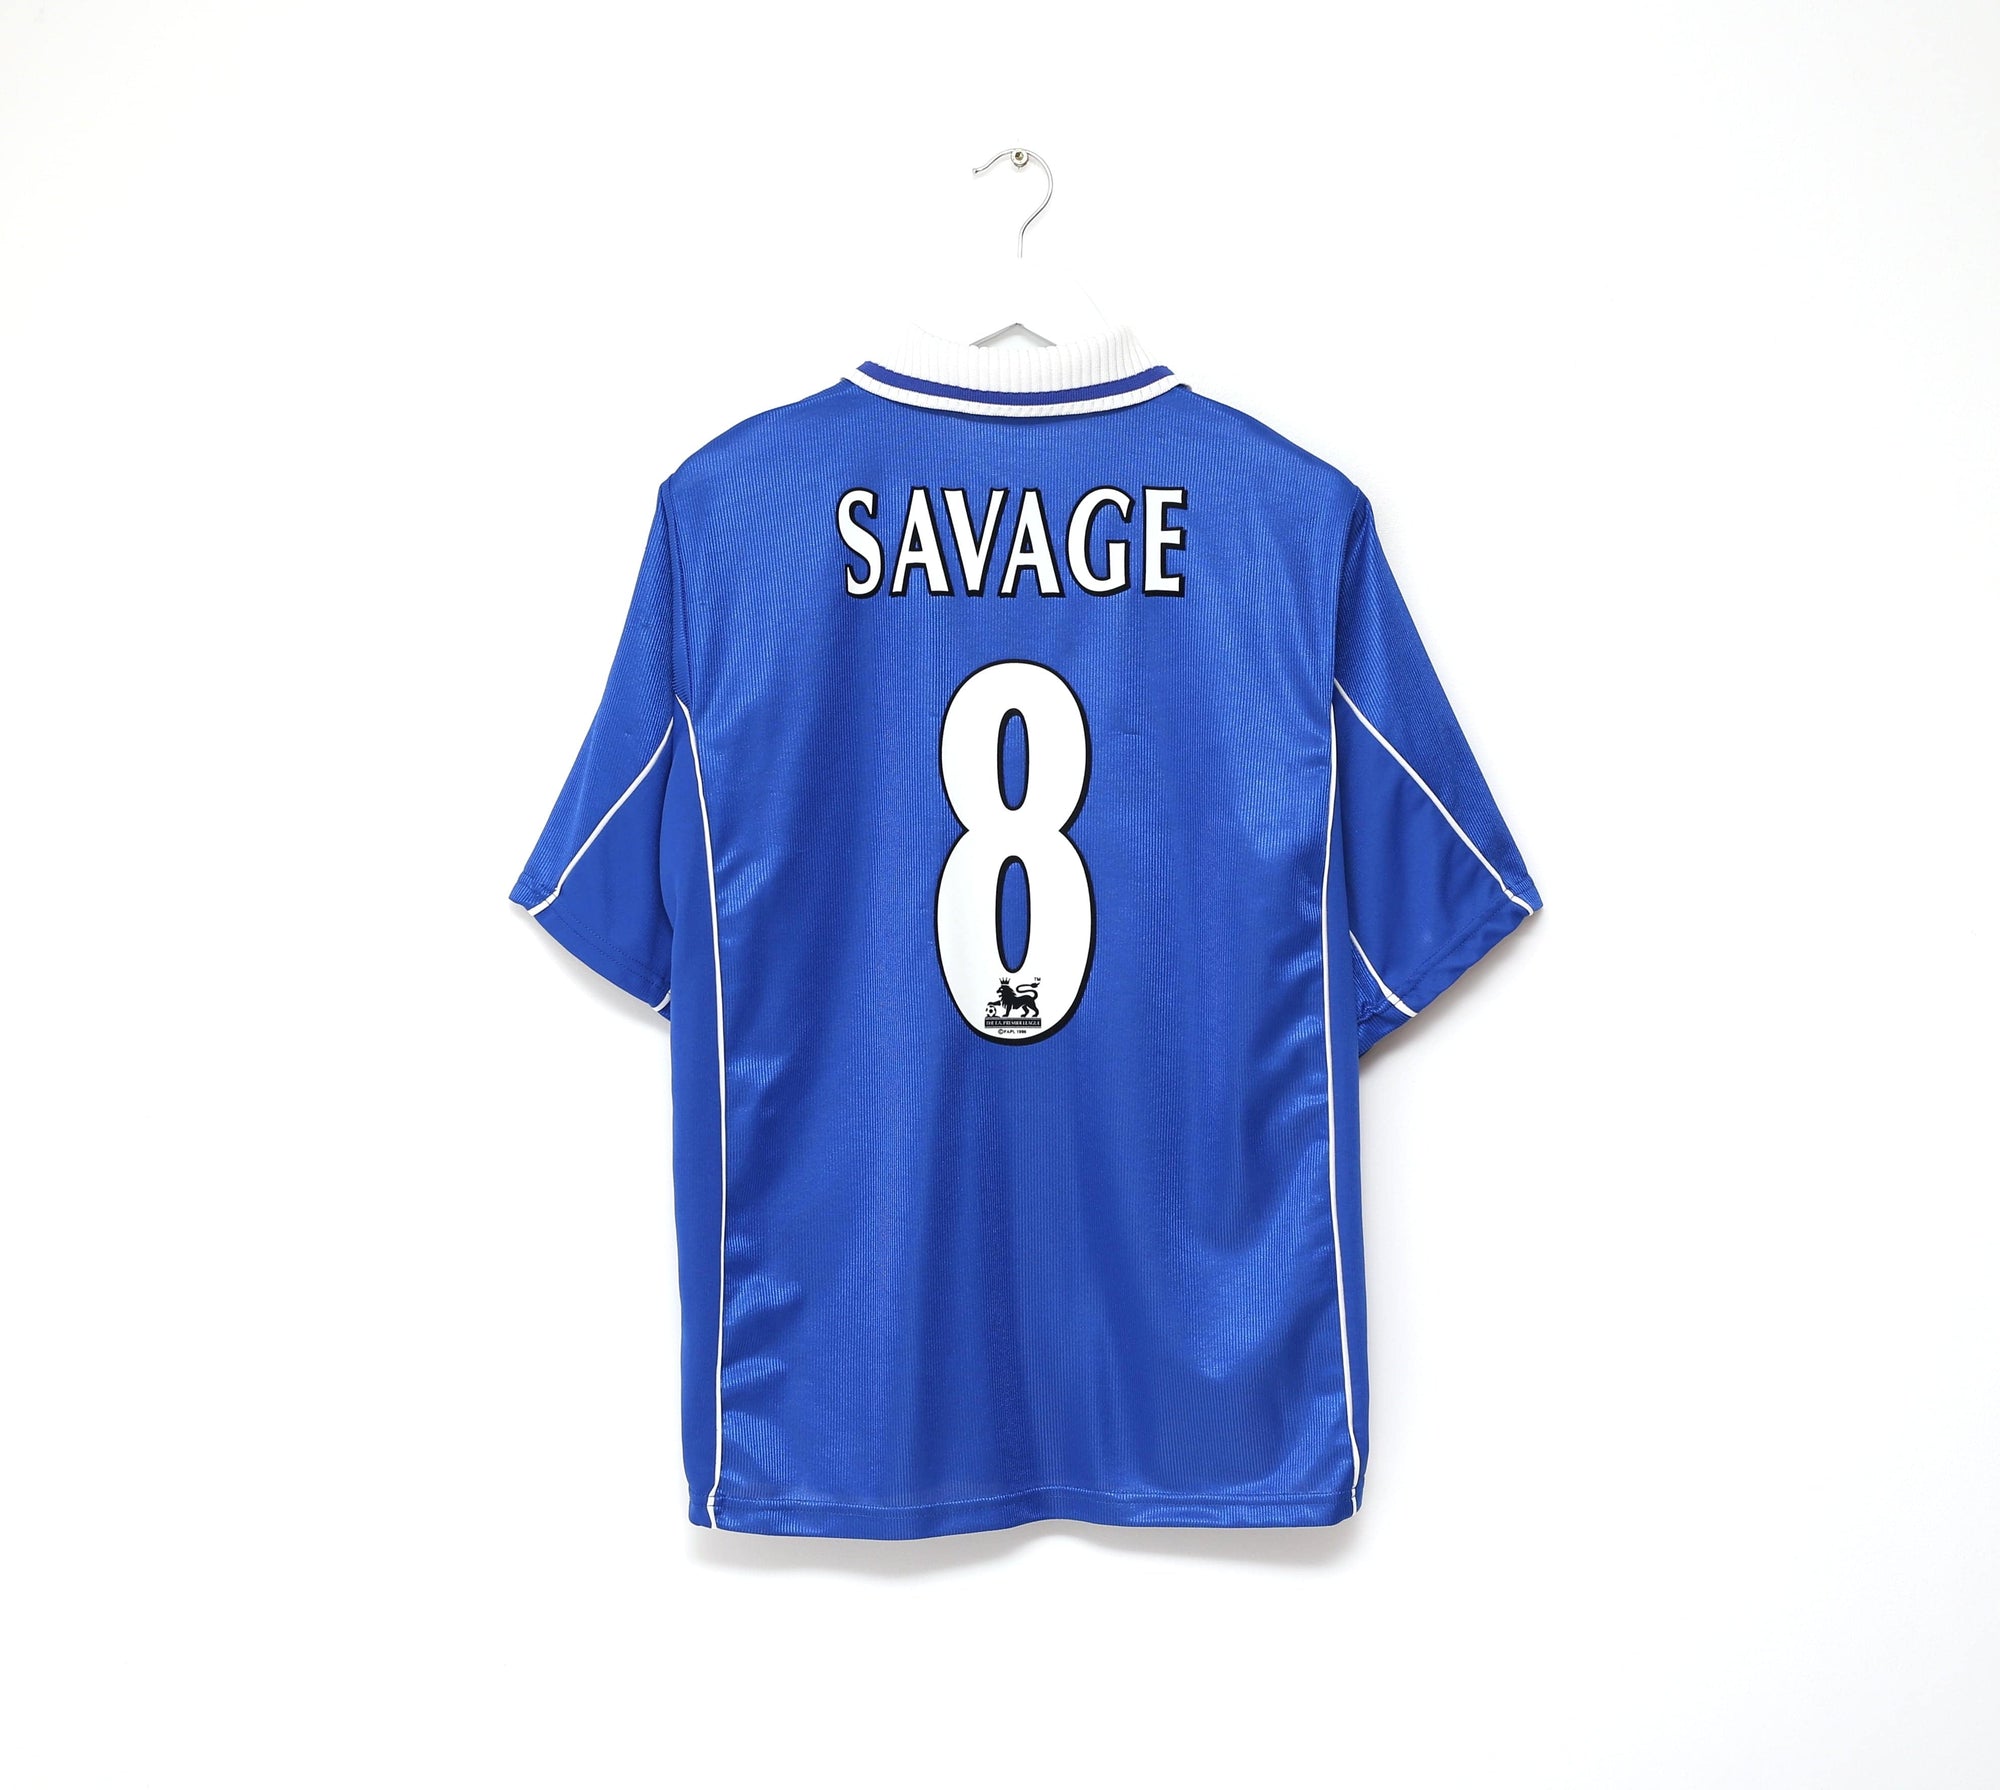 2001/02 SAVAGE #8 Leicester City Vintage LCS Home Football Shirt (L) 42/44